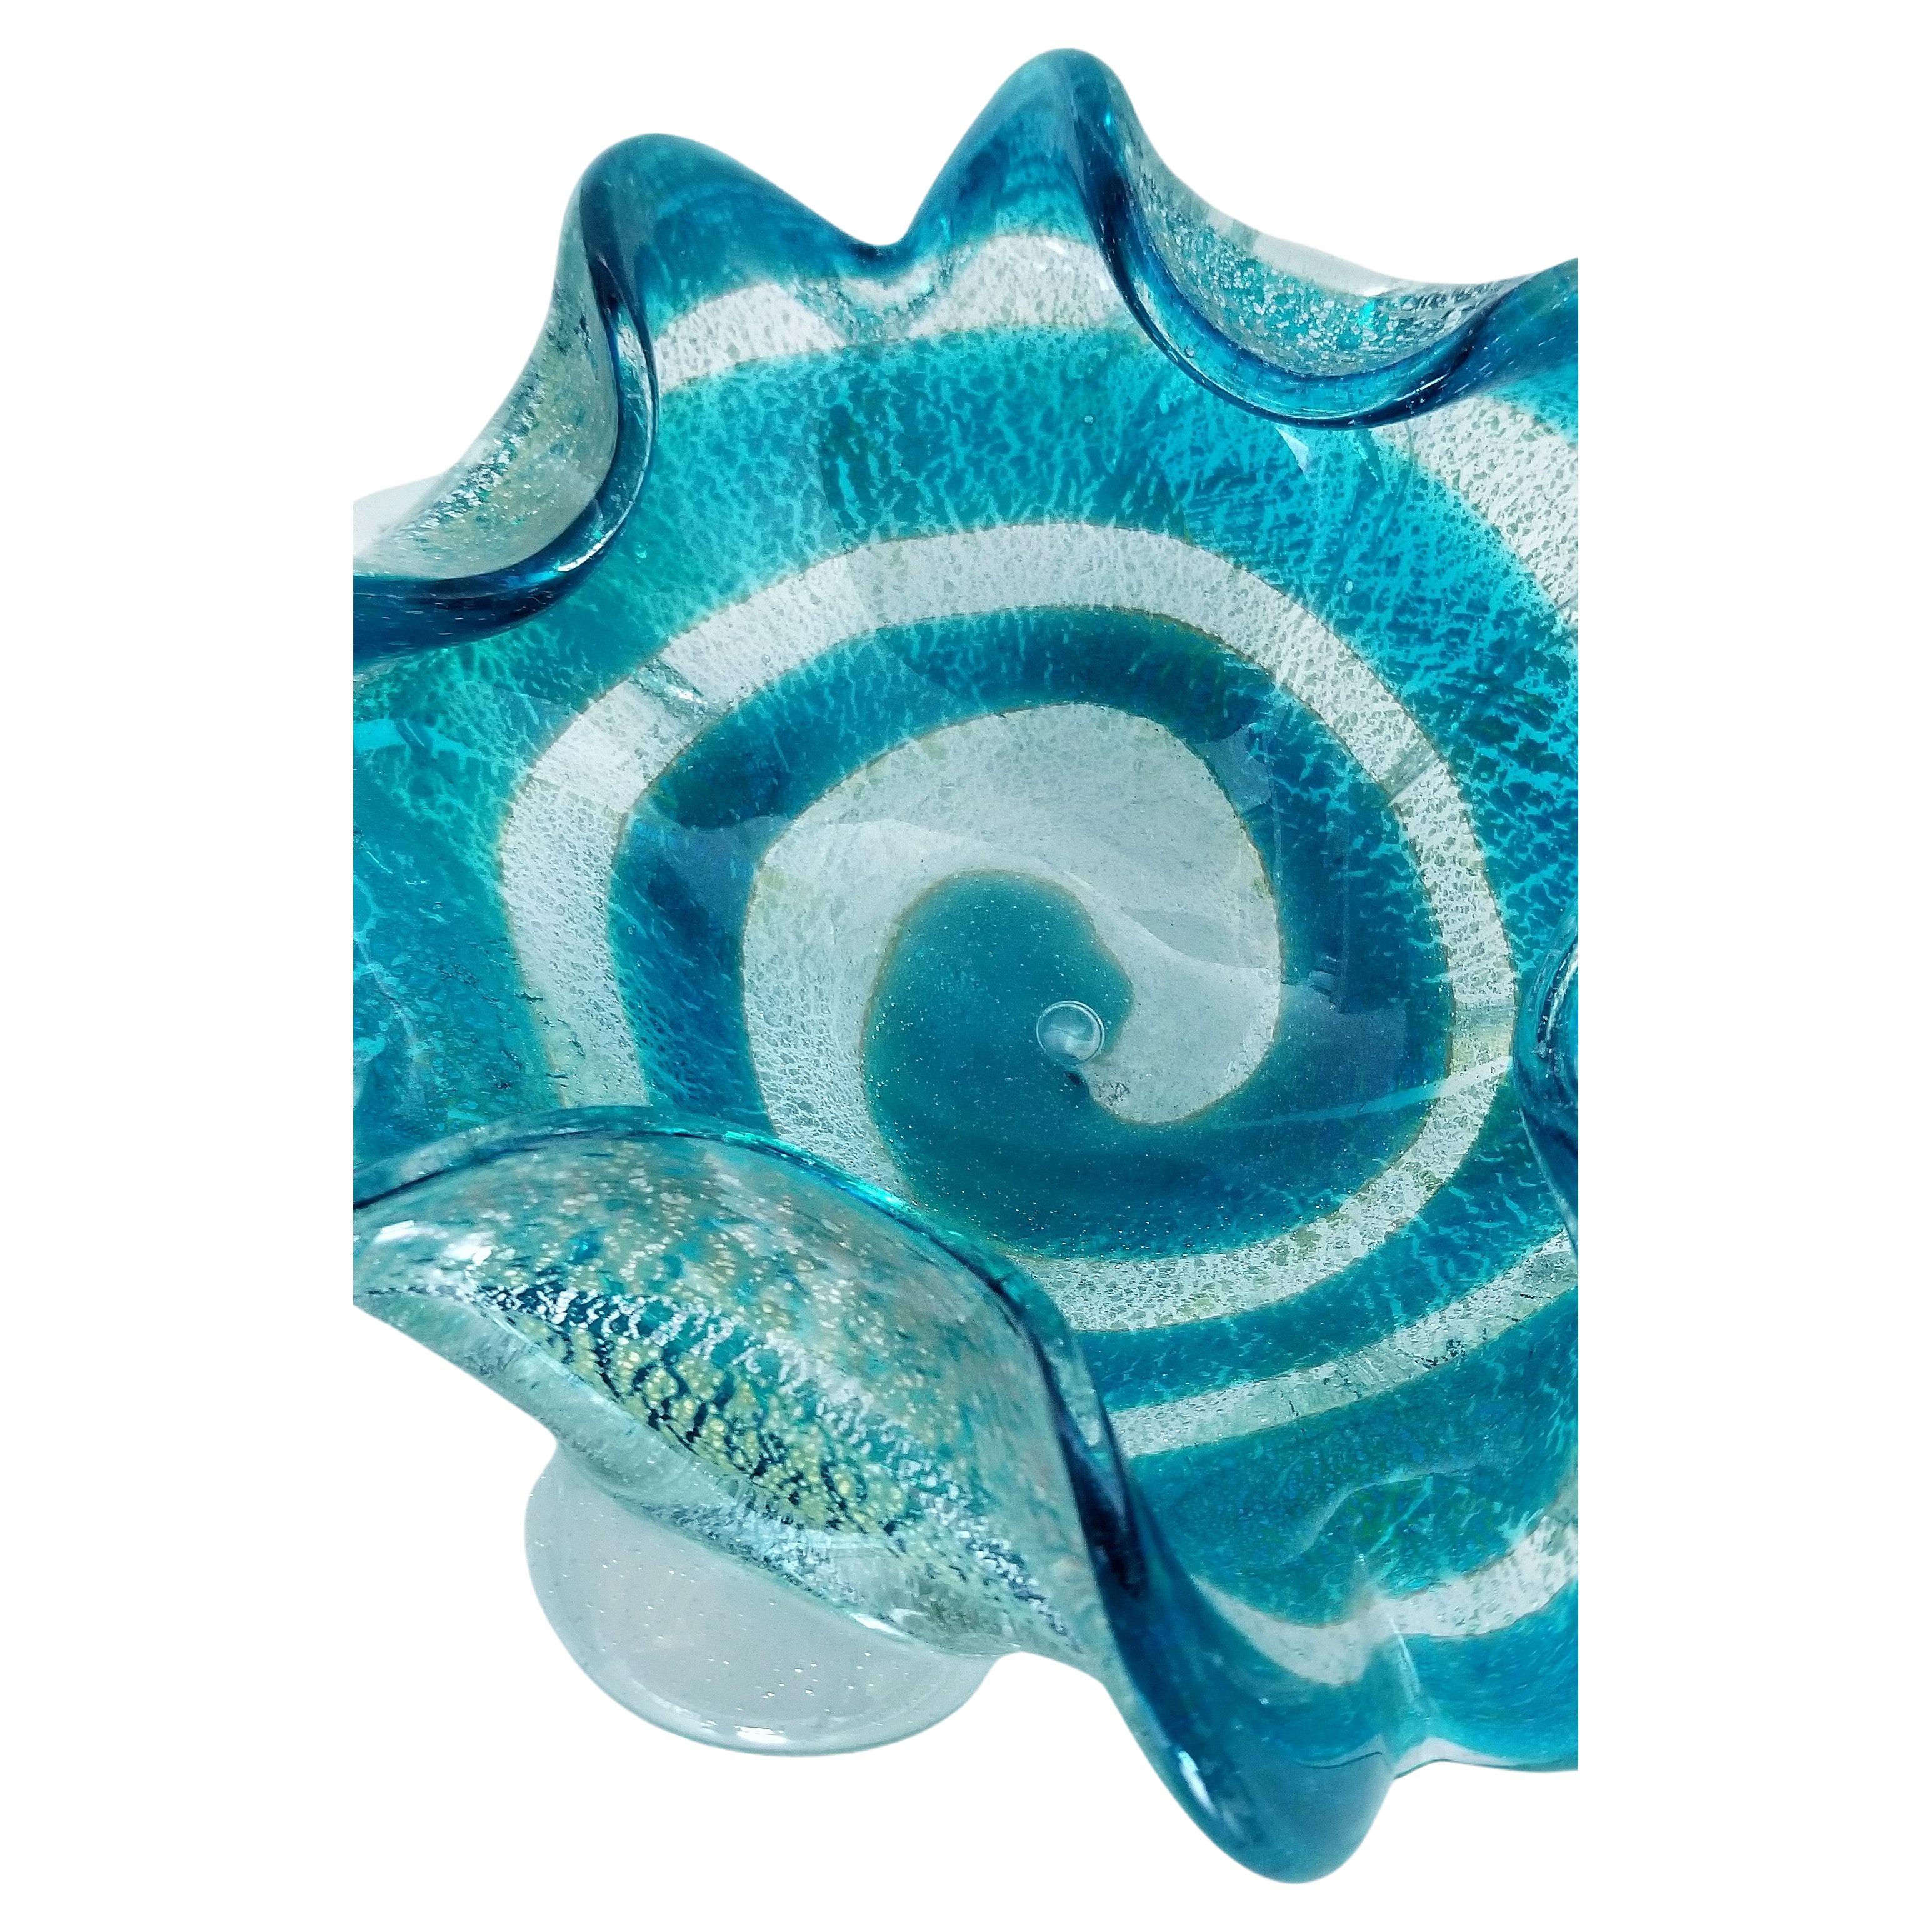 Blue and Silver Murano Glass Ashtray or Catch-all Bowl In Excellent Condition For Sale In Miami, FL